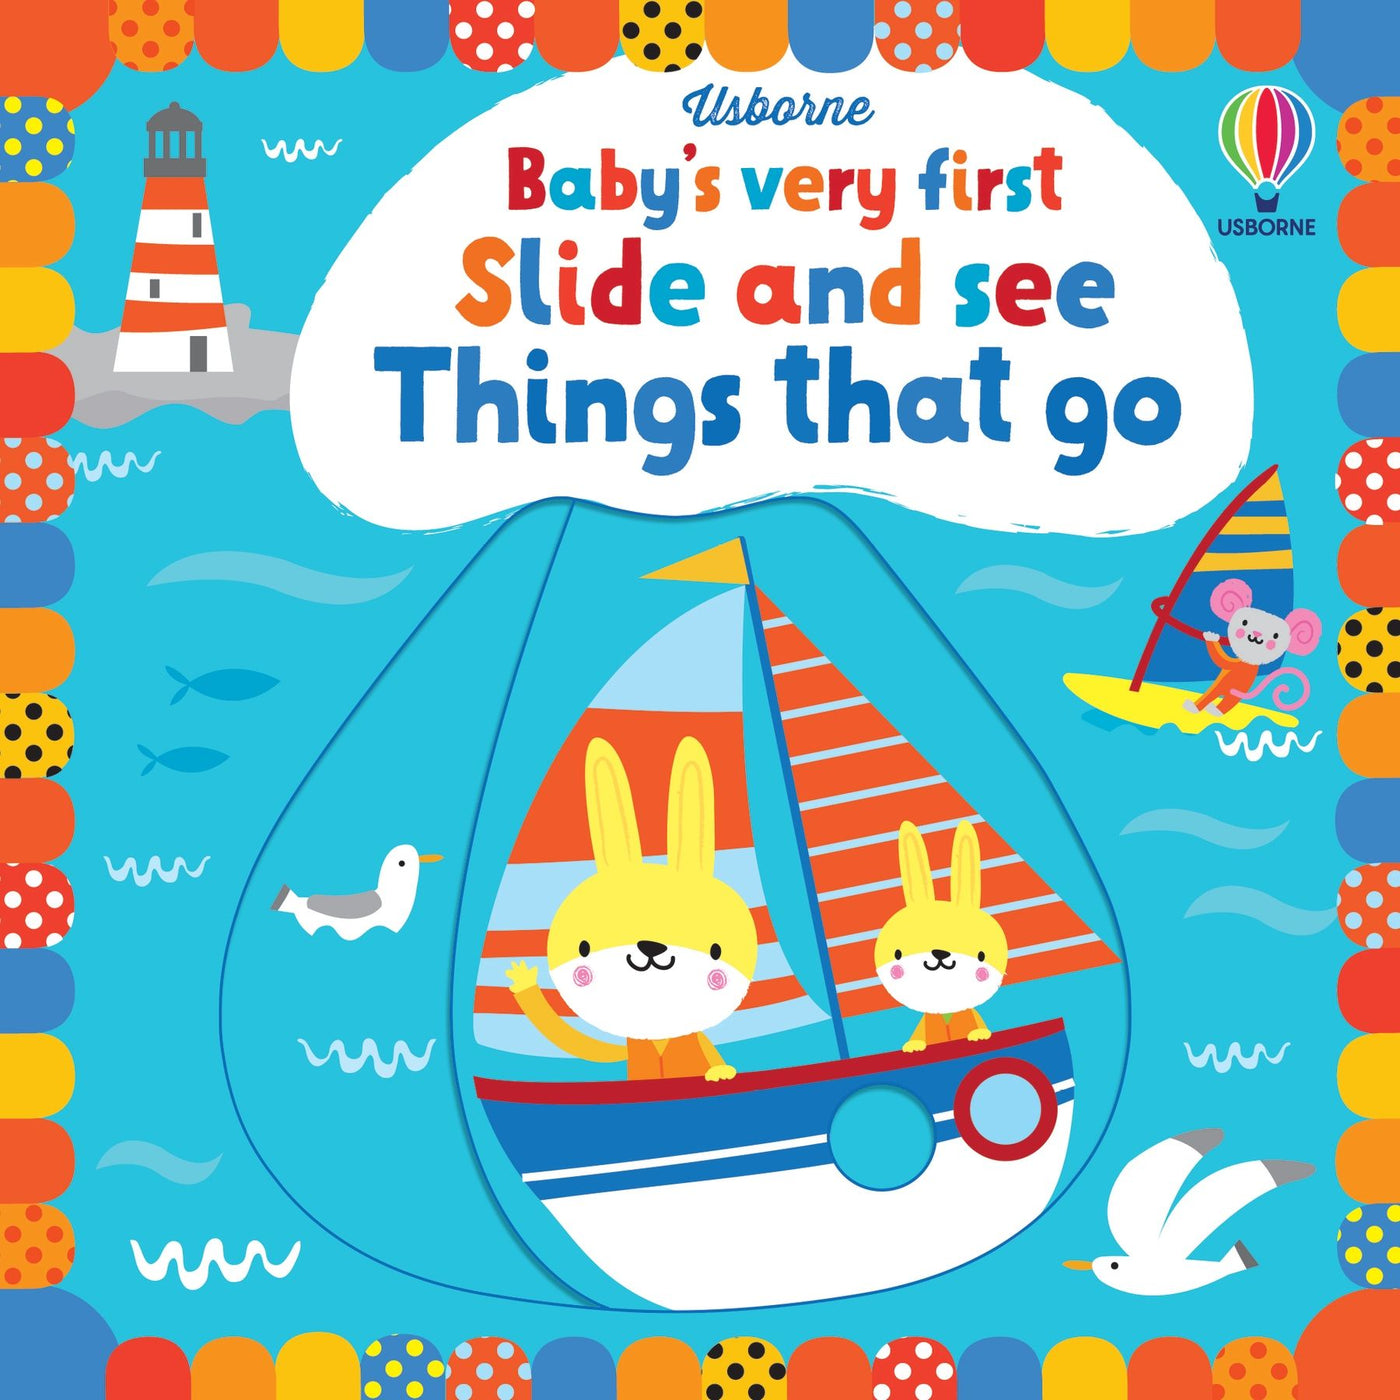 >USBORNE Baby's Very First Slide and See Things that go 0+